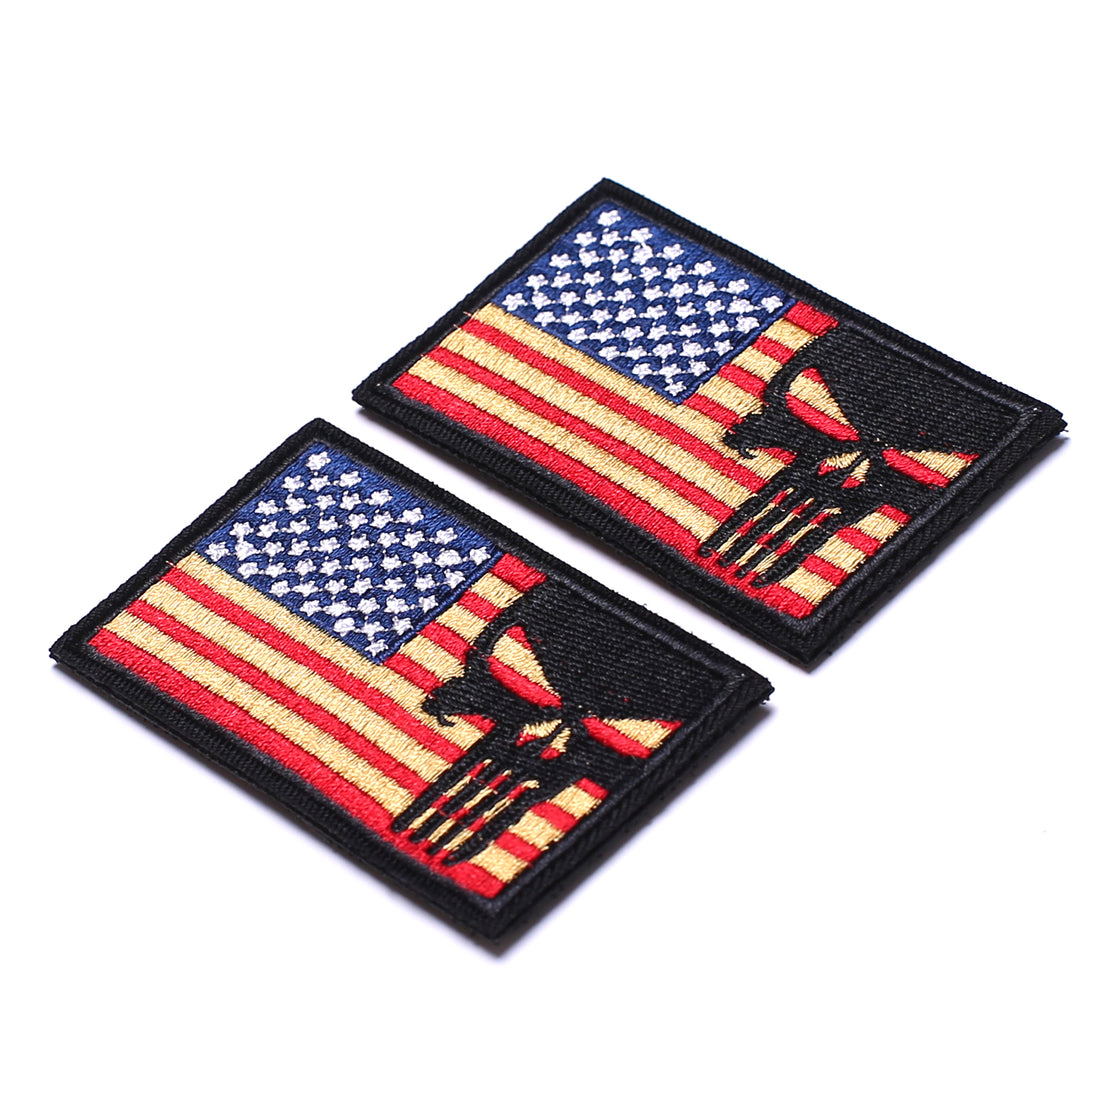 2 x USA PATCH AMERICAN FLAG TACTICAL US MORALE MILITARY DESERT FASTEN —  AllTopBargains